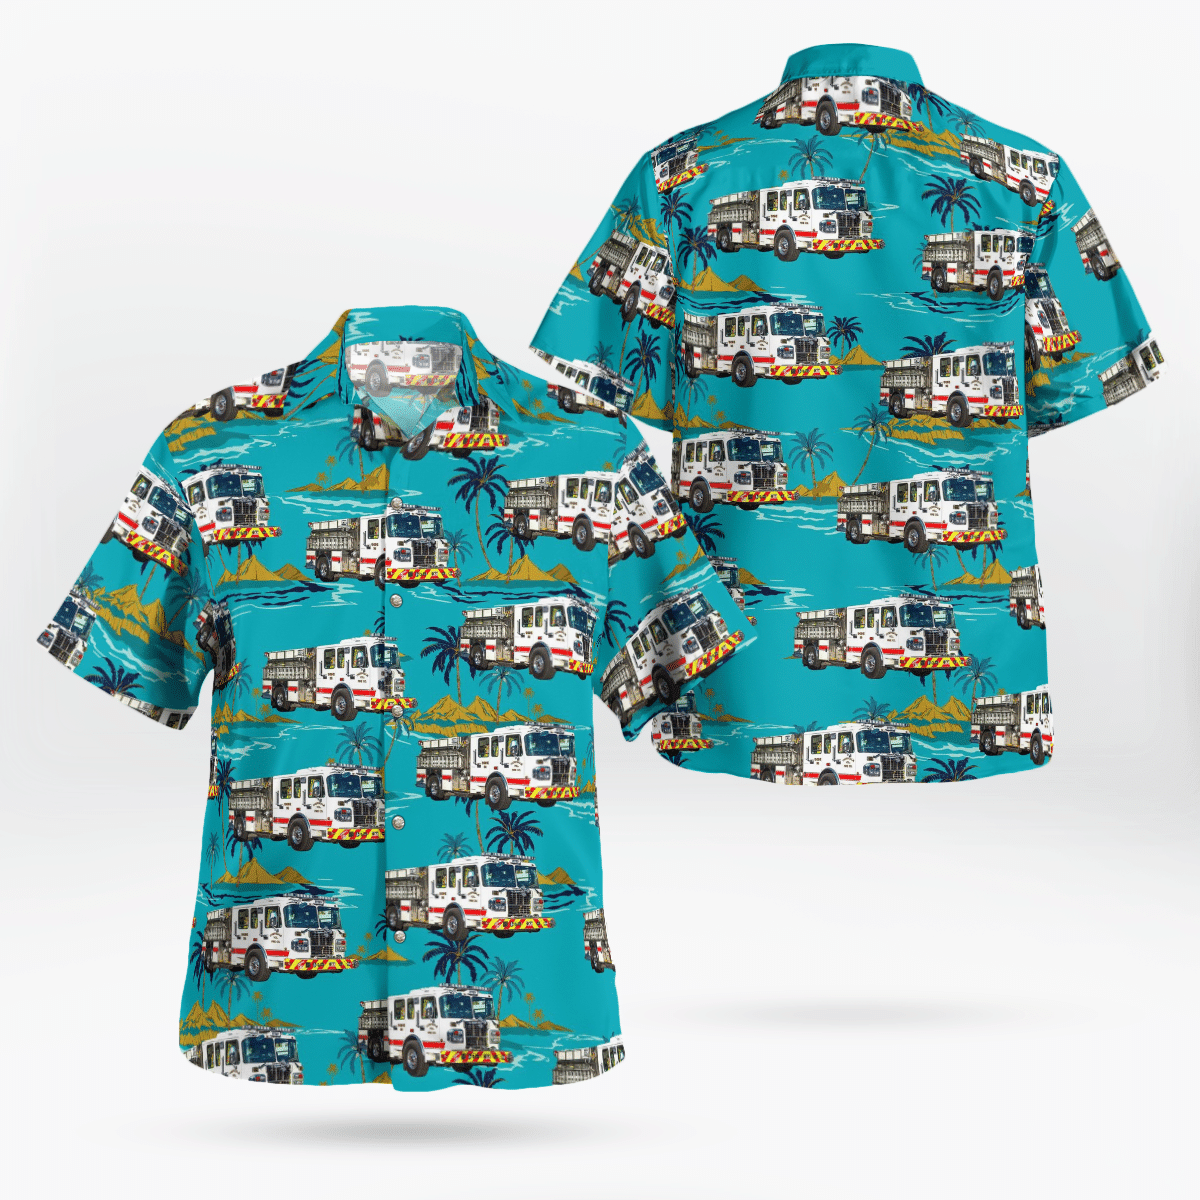 If you want to be noticed, wear These Trendy Hawaiian Shirt 72